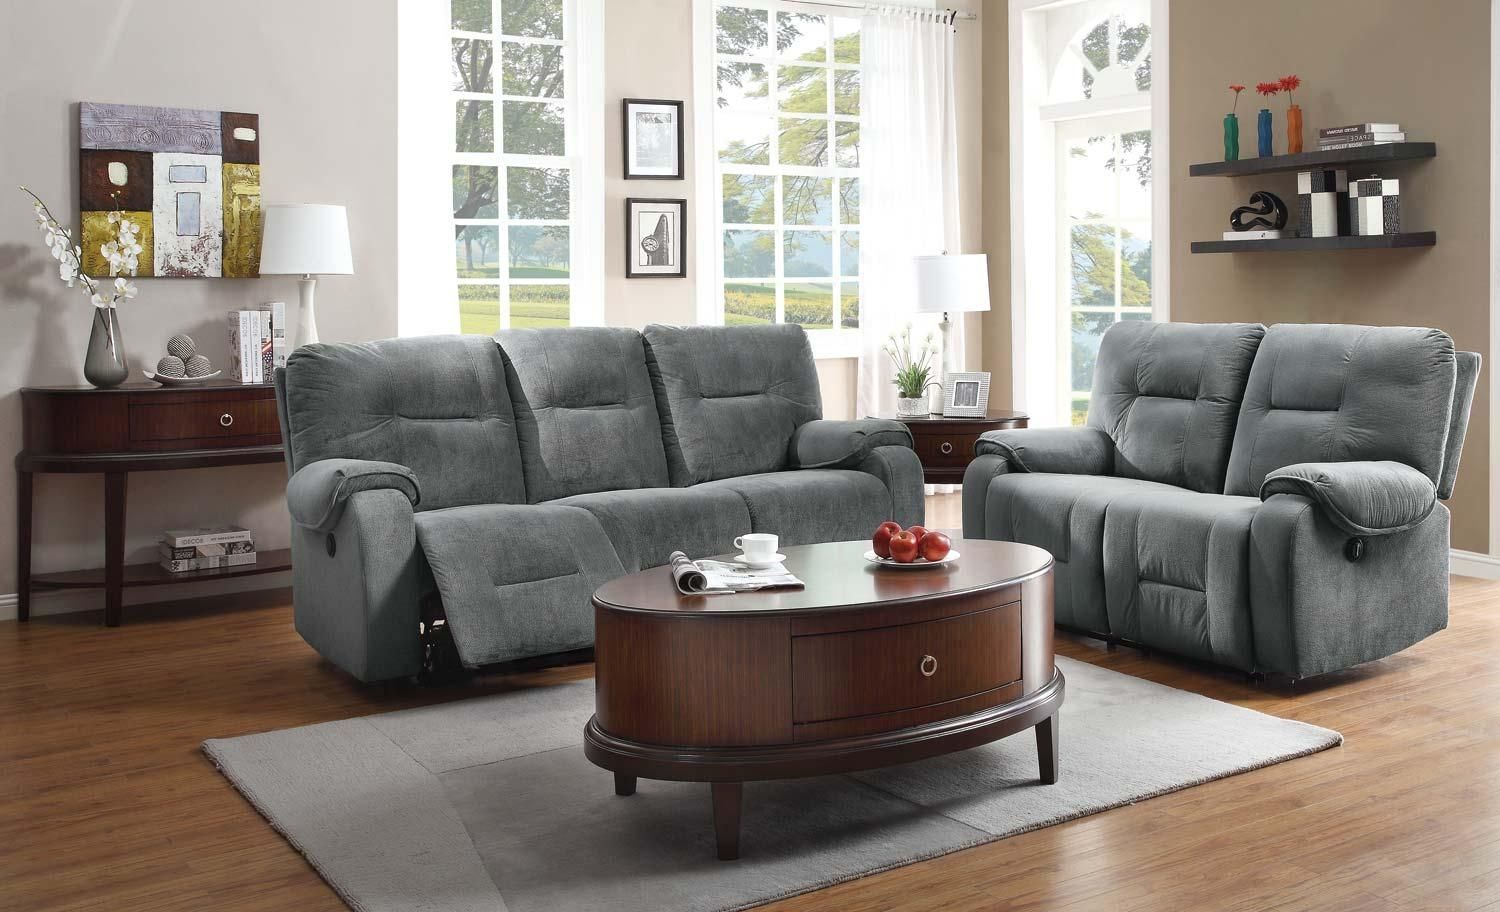 20+ Choices Of Blue Gray Sofas | Sofa Ideas With Regard To Sofas In Bluish Grey (Gallery 13 of 20)